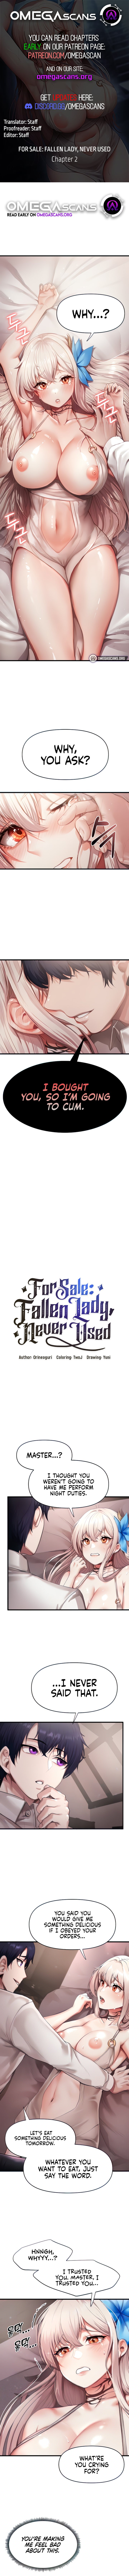 For Sale: Fallen Lady, Never Used - Chapter 2 Page 1